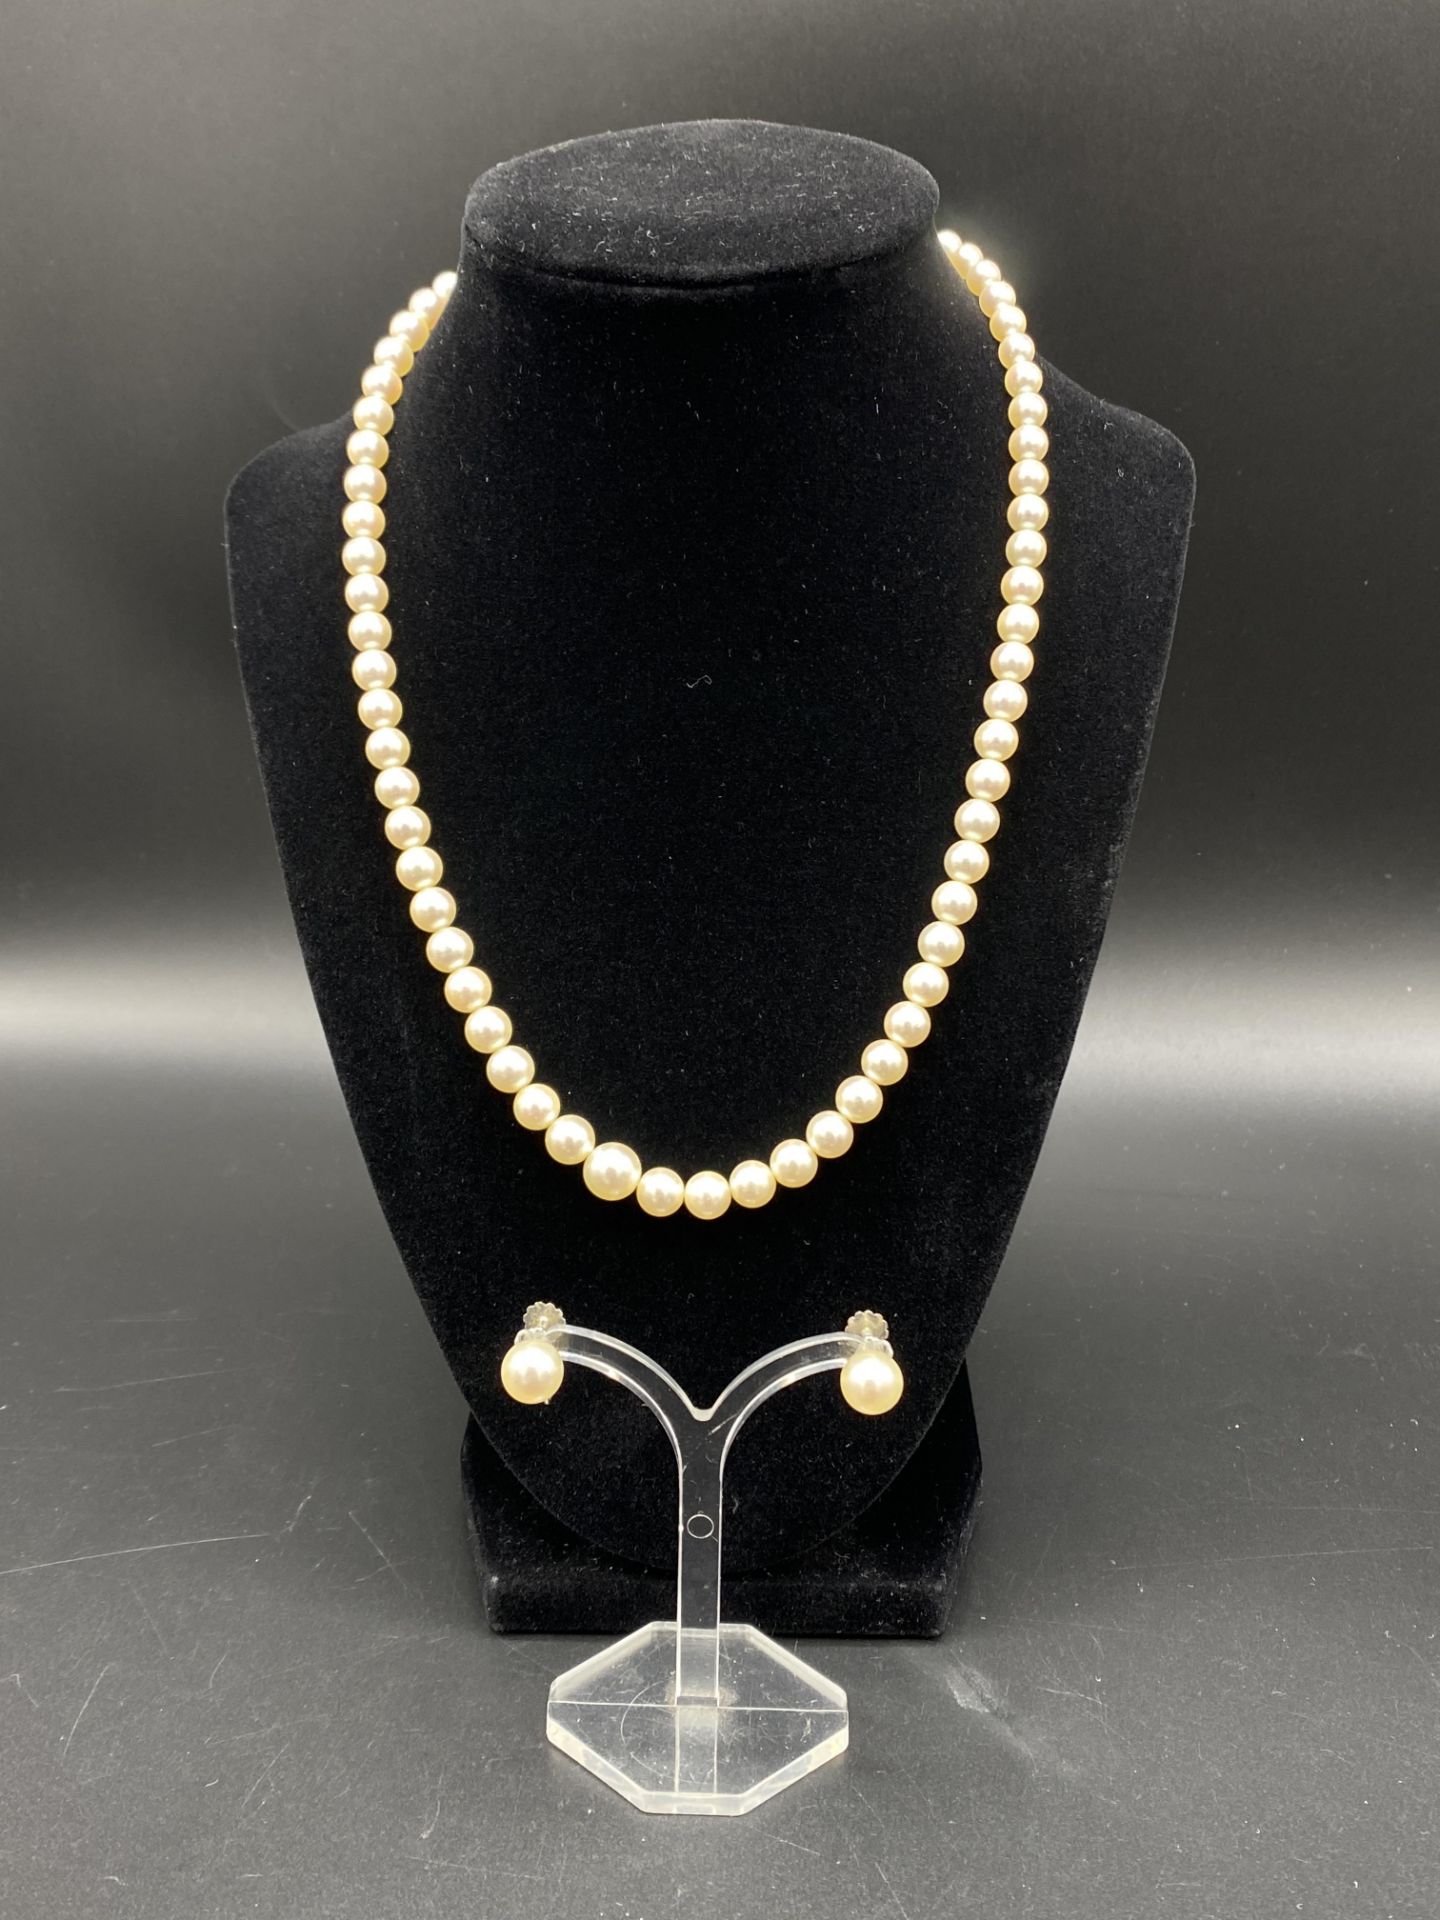 Pearl necklace with matching earrings